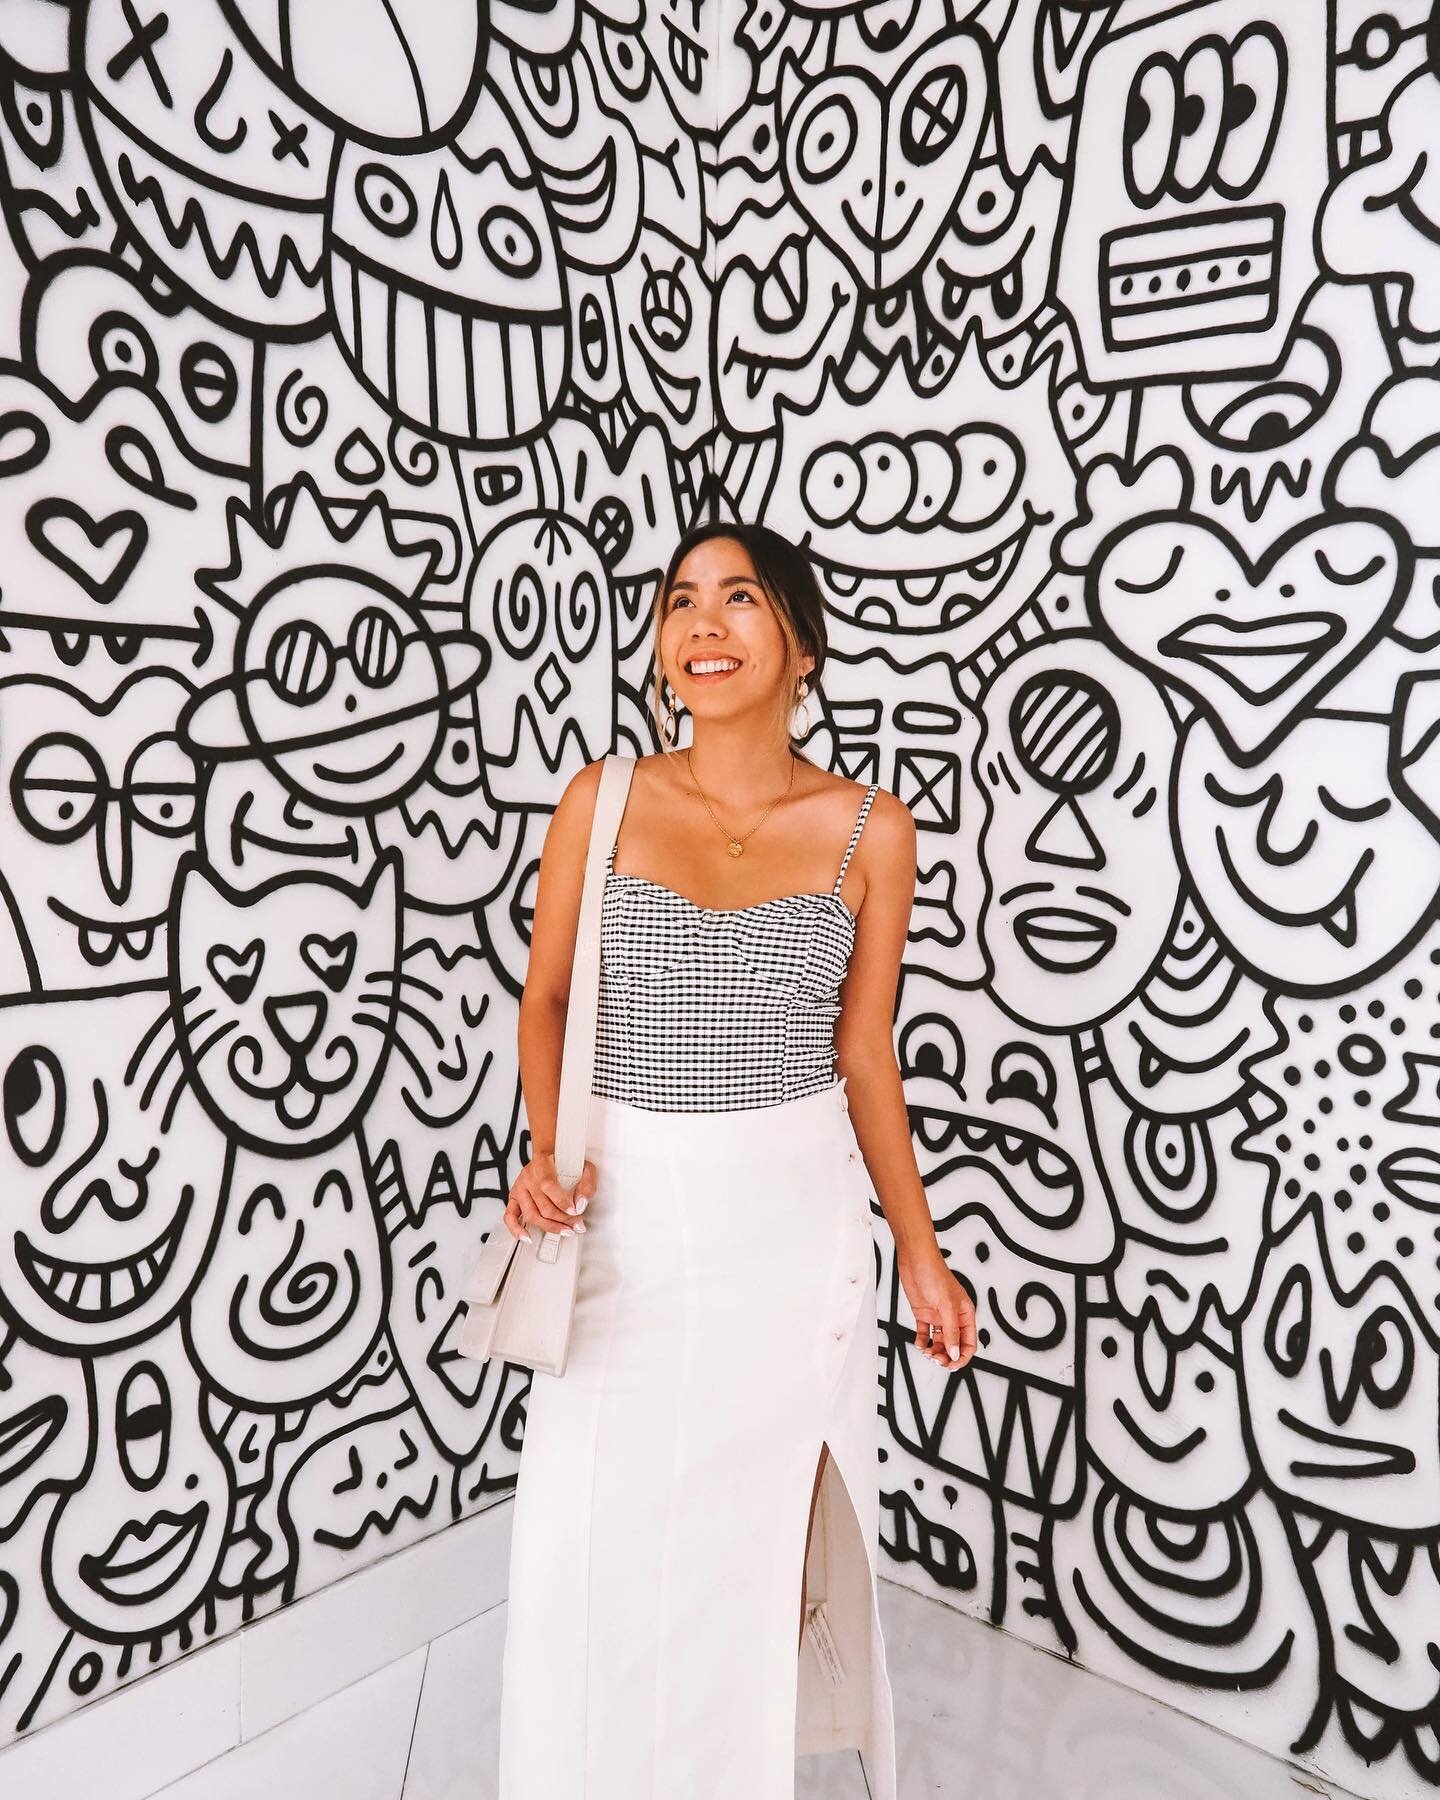 Explore one of my favorite places to visit for creative inspiration @fashionshowlv! 💕🌈🦋🎨

Which is your favorite art installation? 
A. &ldquo;Pretty In Ink&rdquo;
B. &ldquo;Heartfullness Vegas&rdquo;
C. &ldquo;Be Kind to Bugs&rdquo;
D. &ldquo;Col